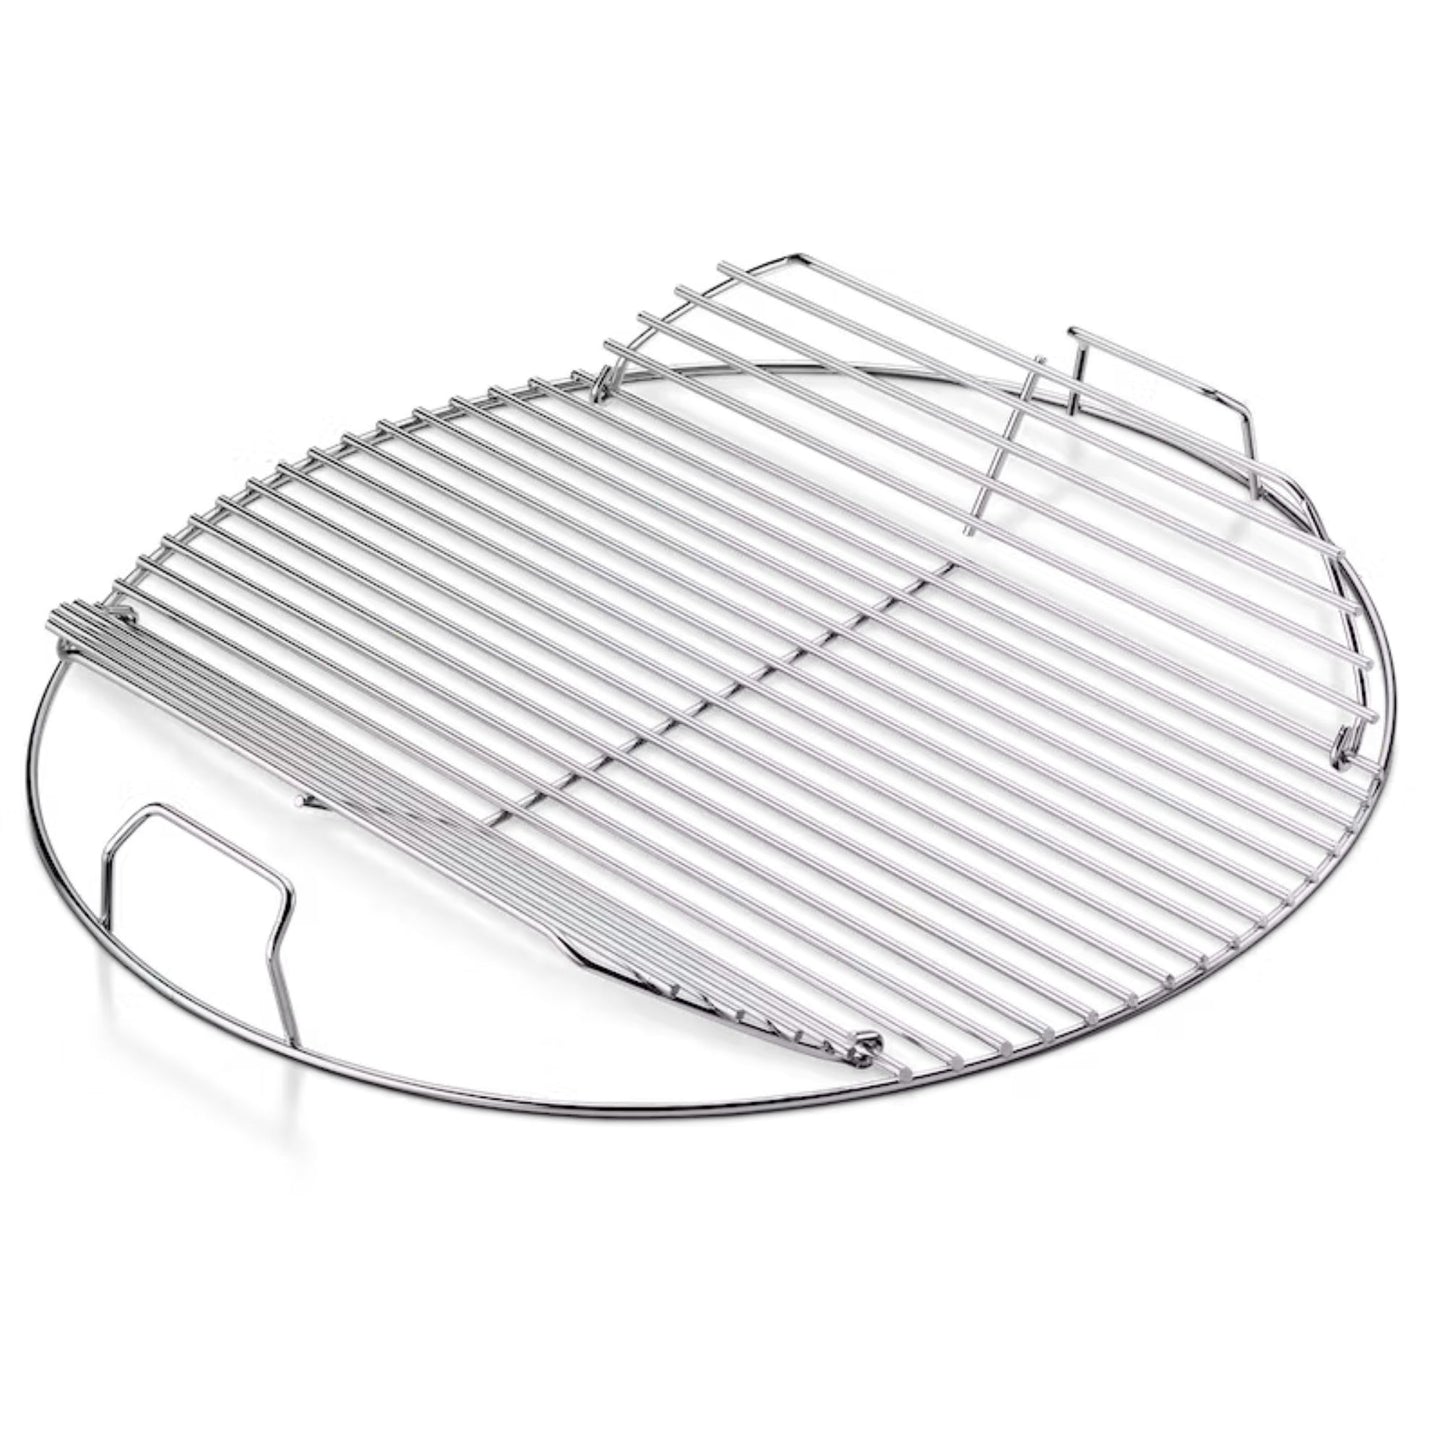 Weber Hinged Cooking Grate for 22" Charcoal Grills